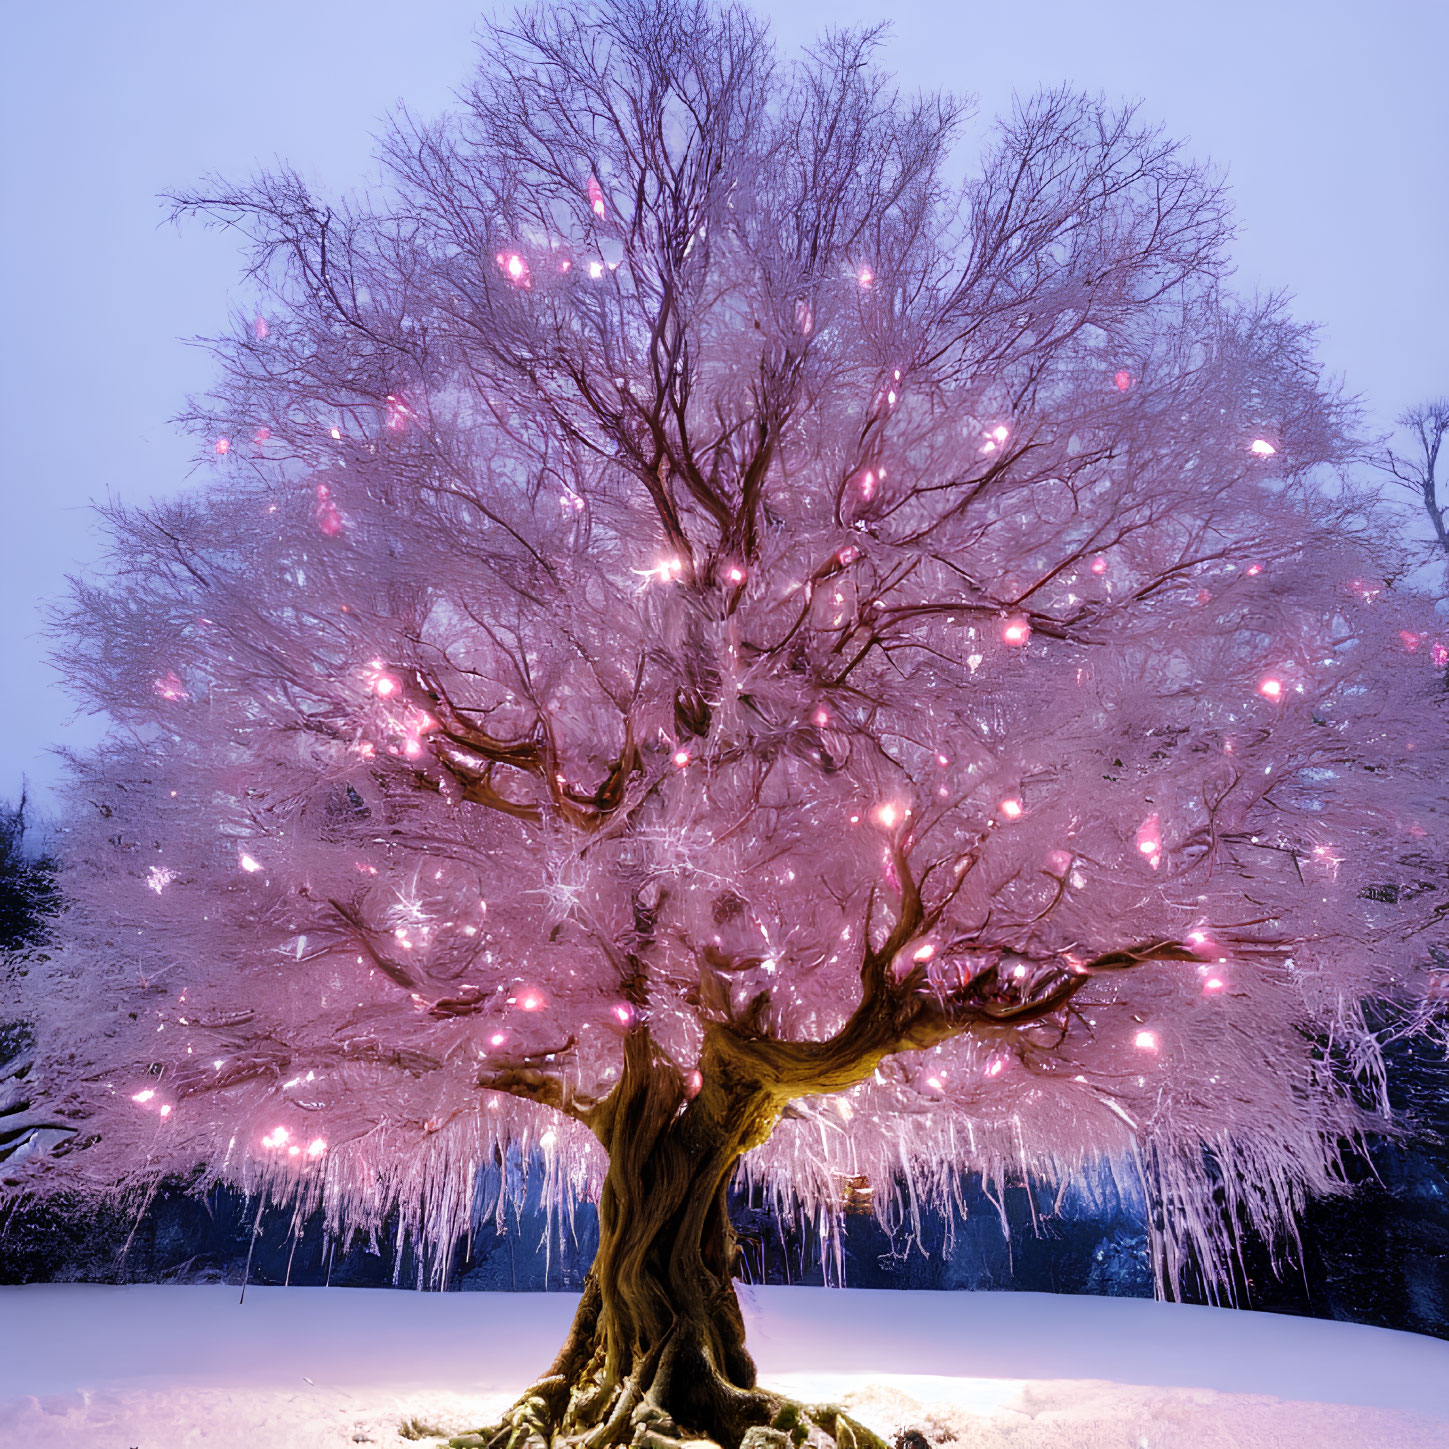 Snowy ground with pink-lit tree in twilight